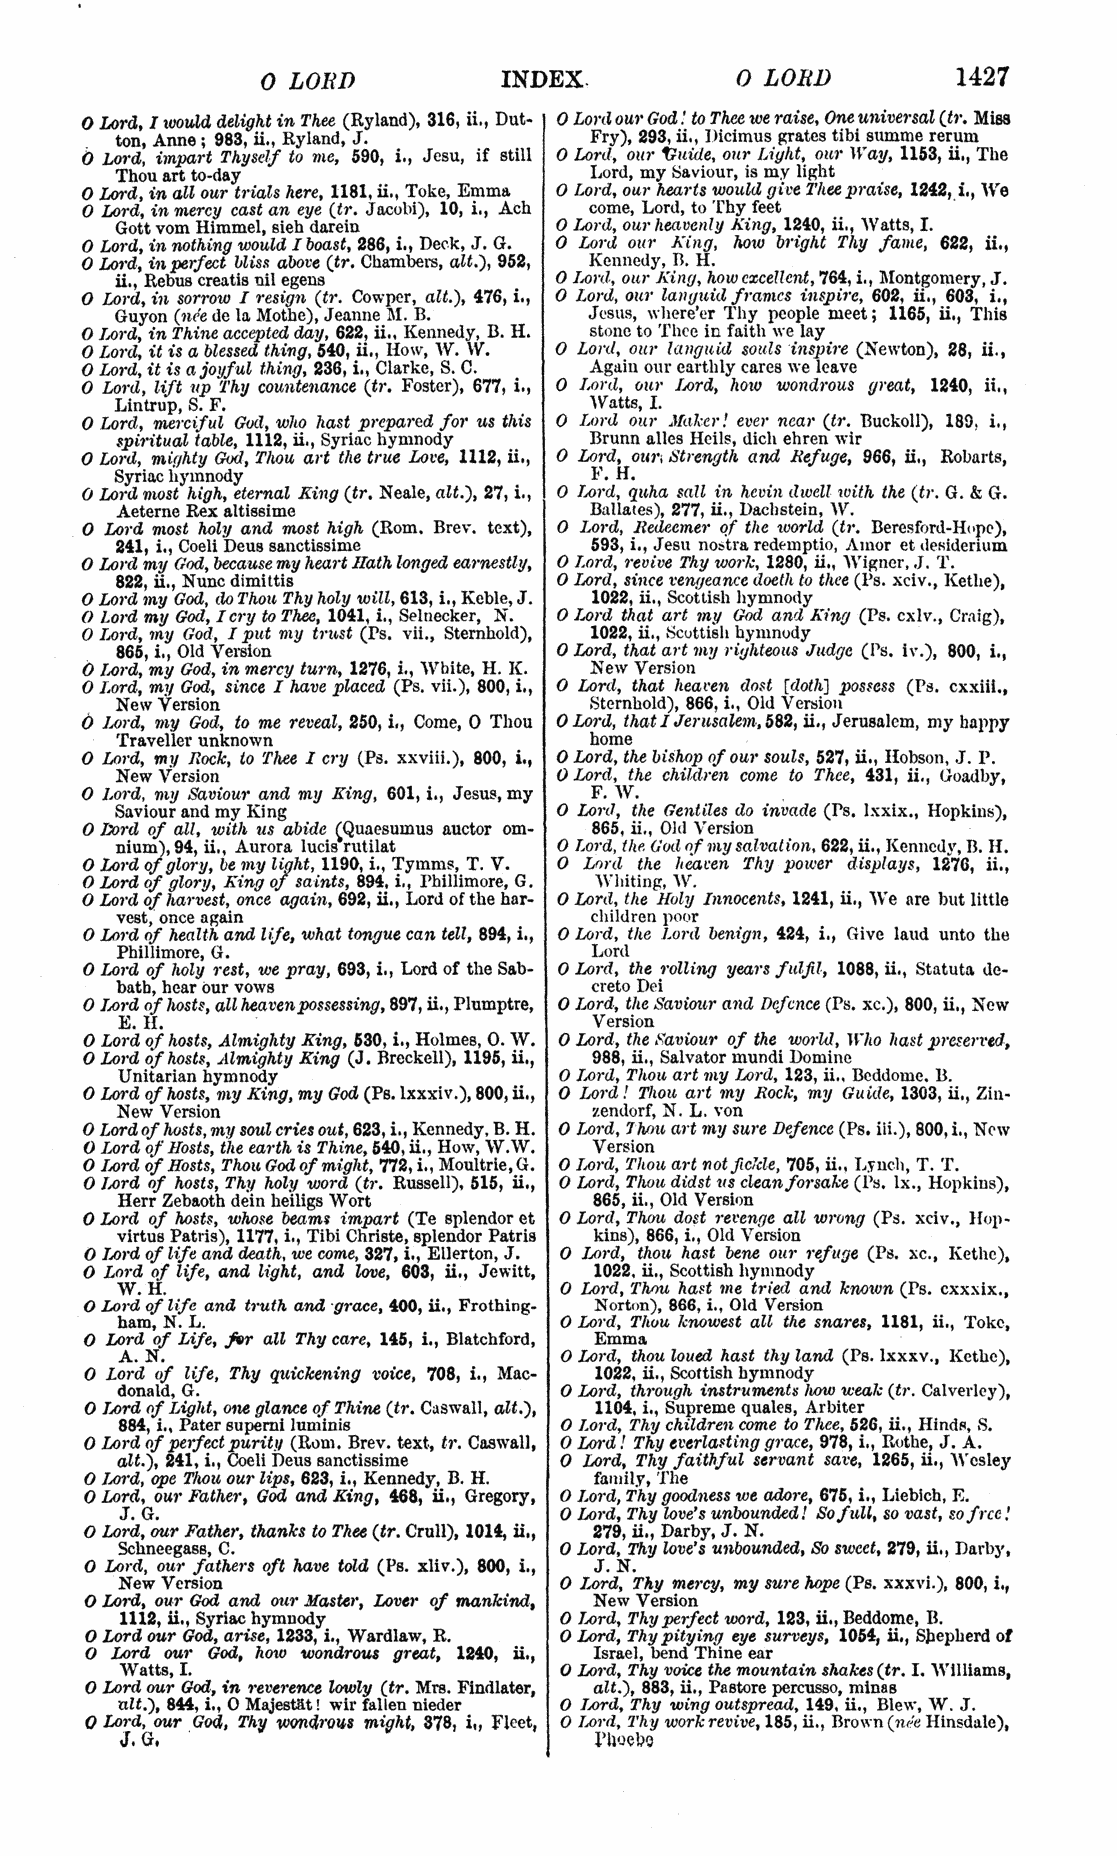 Image of page 1427